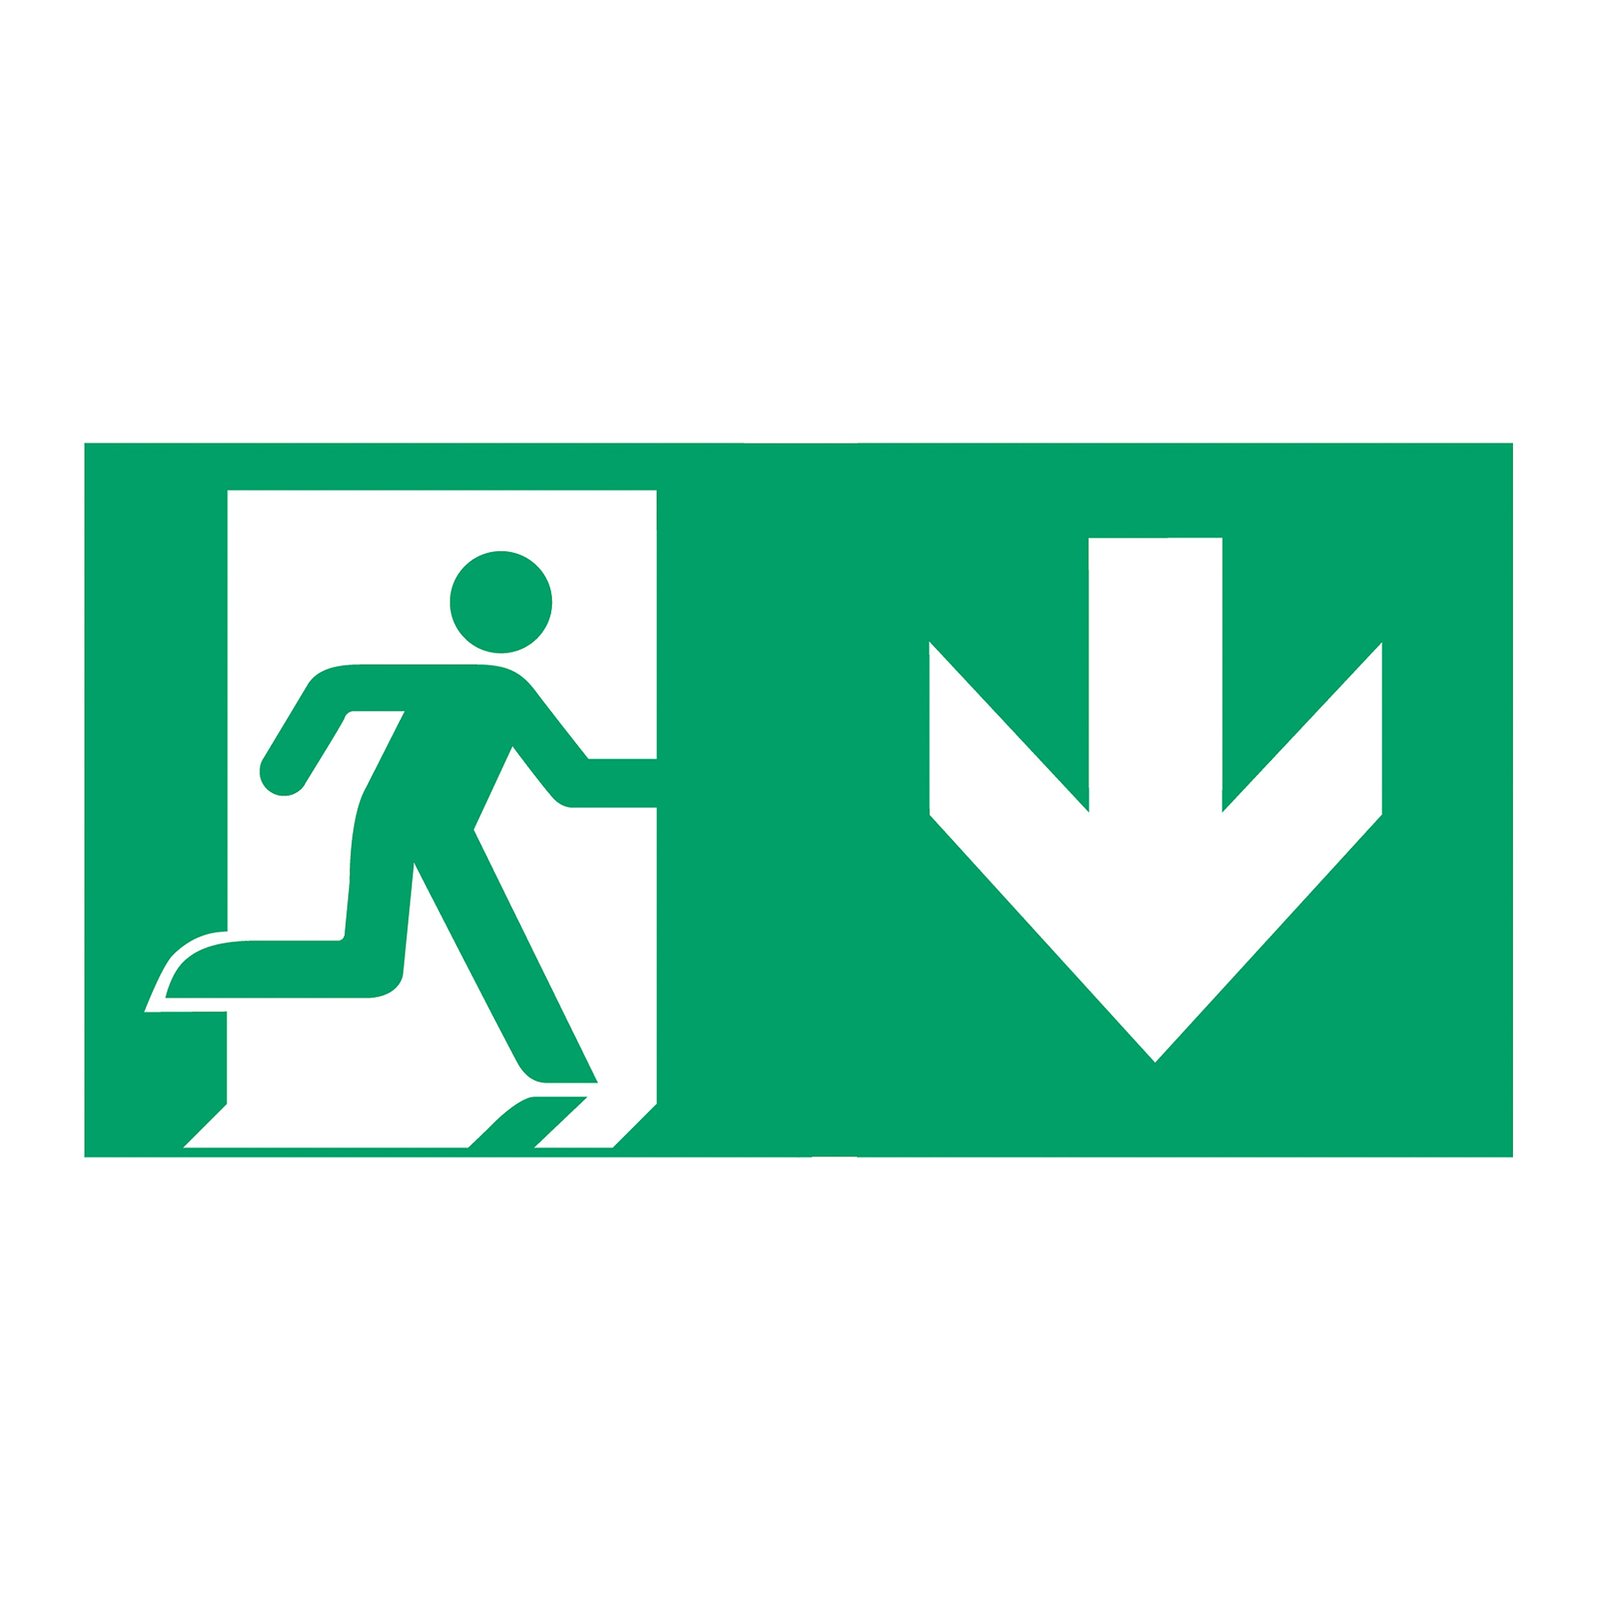 Type A emergency exit sign for C-LUX Standard